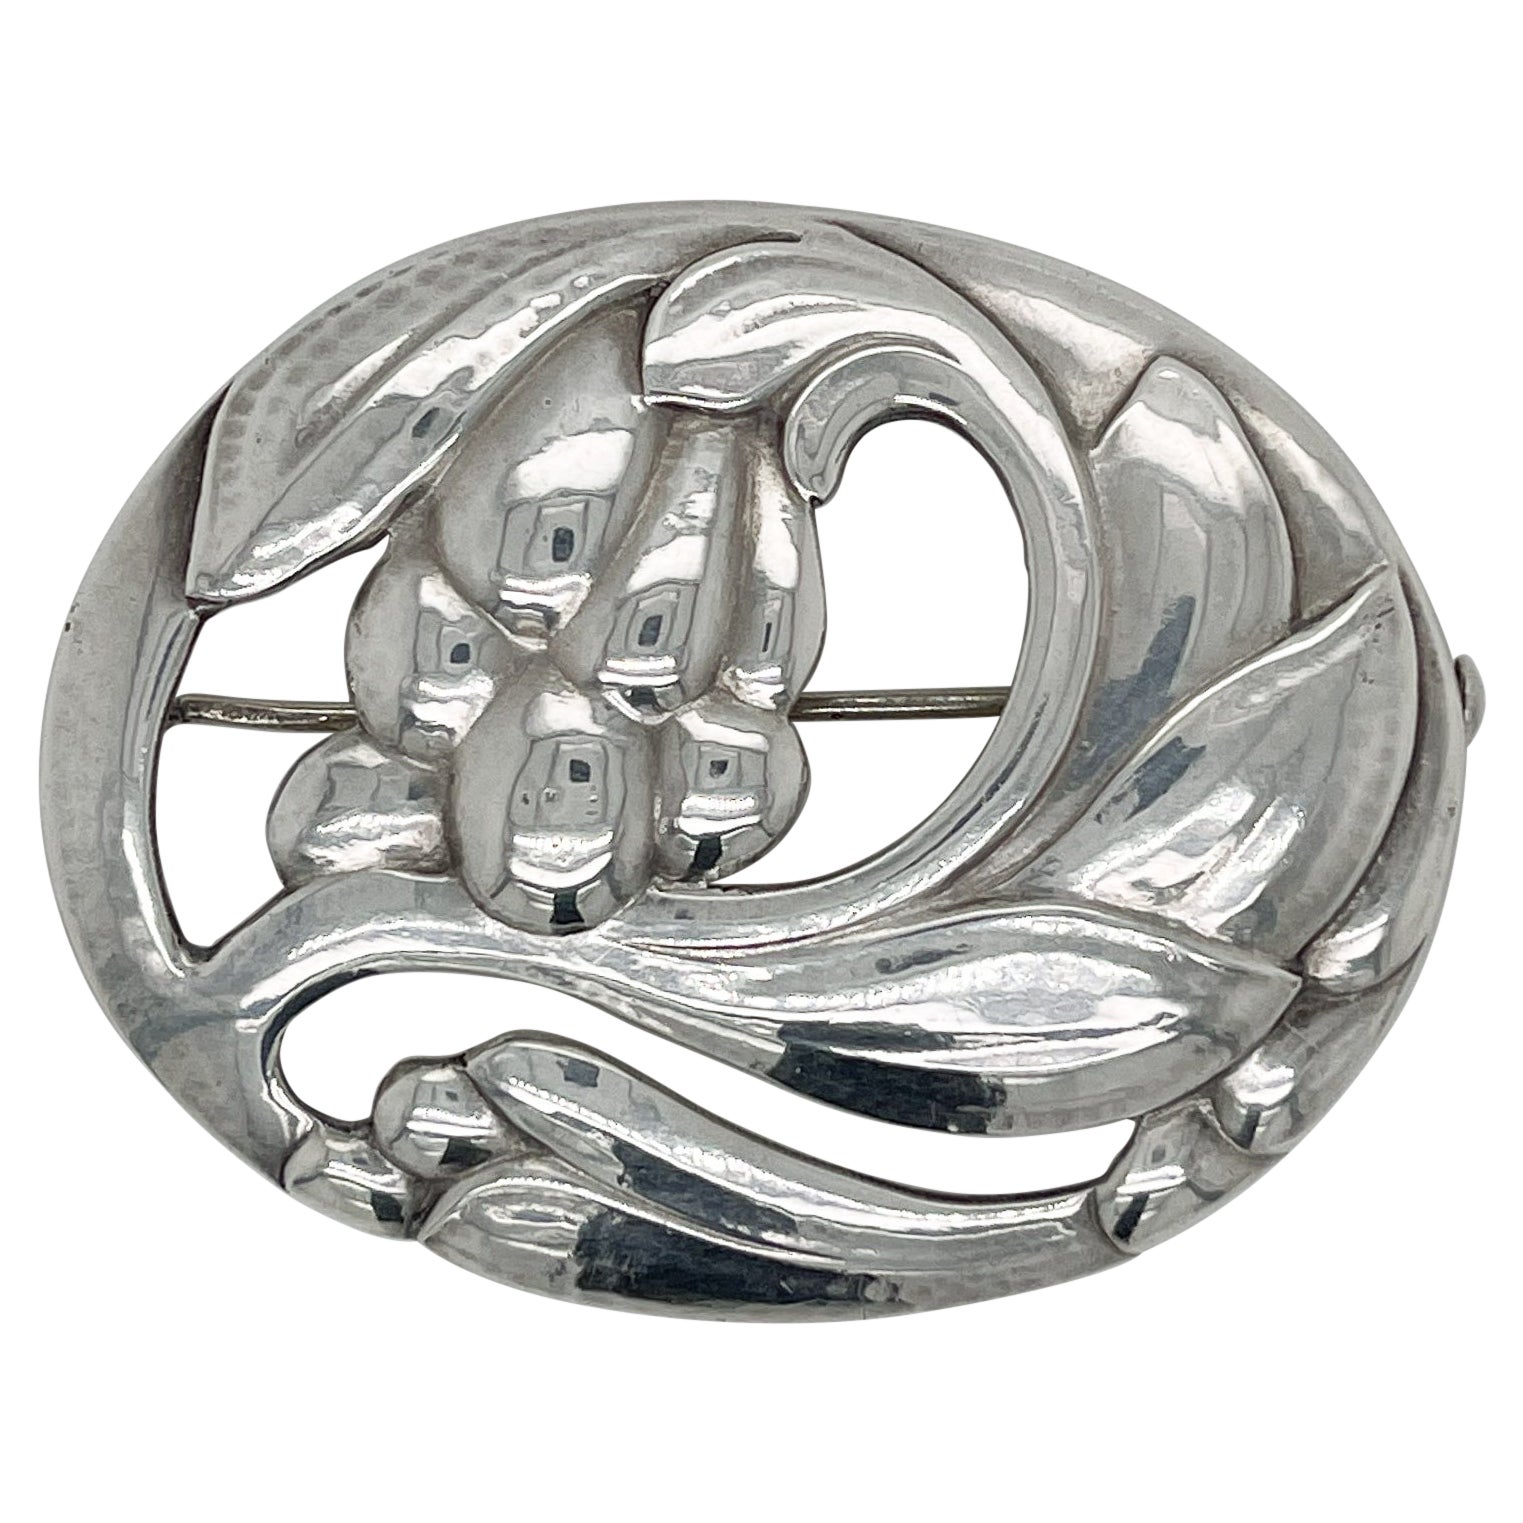 A fine antique Georg Jensen brooch or pin.

In sterling silver.

Model no. 65 with a floral motif.

Designed by Georg Jensen.

Together with its original box from Walter Muhke-Hofjuwelier Coblenz (Crown Jeweler).

Simply a wonderful brooch from one